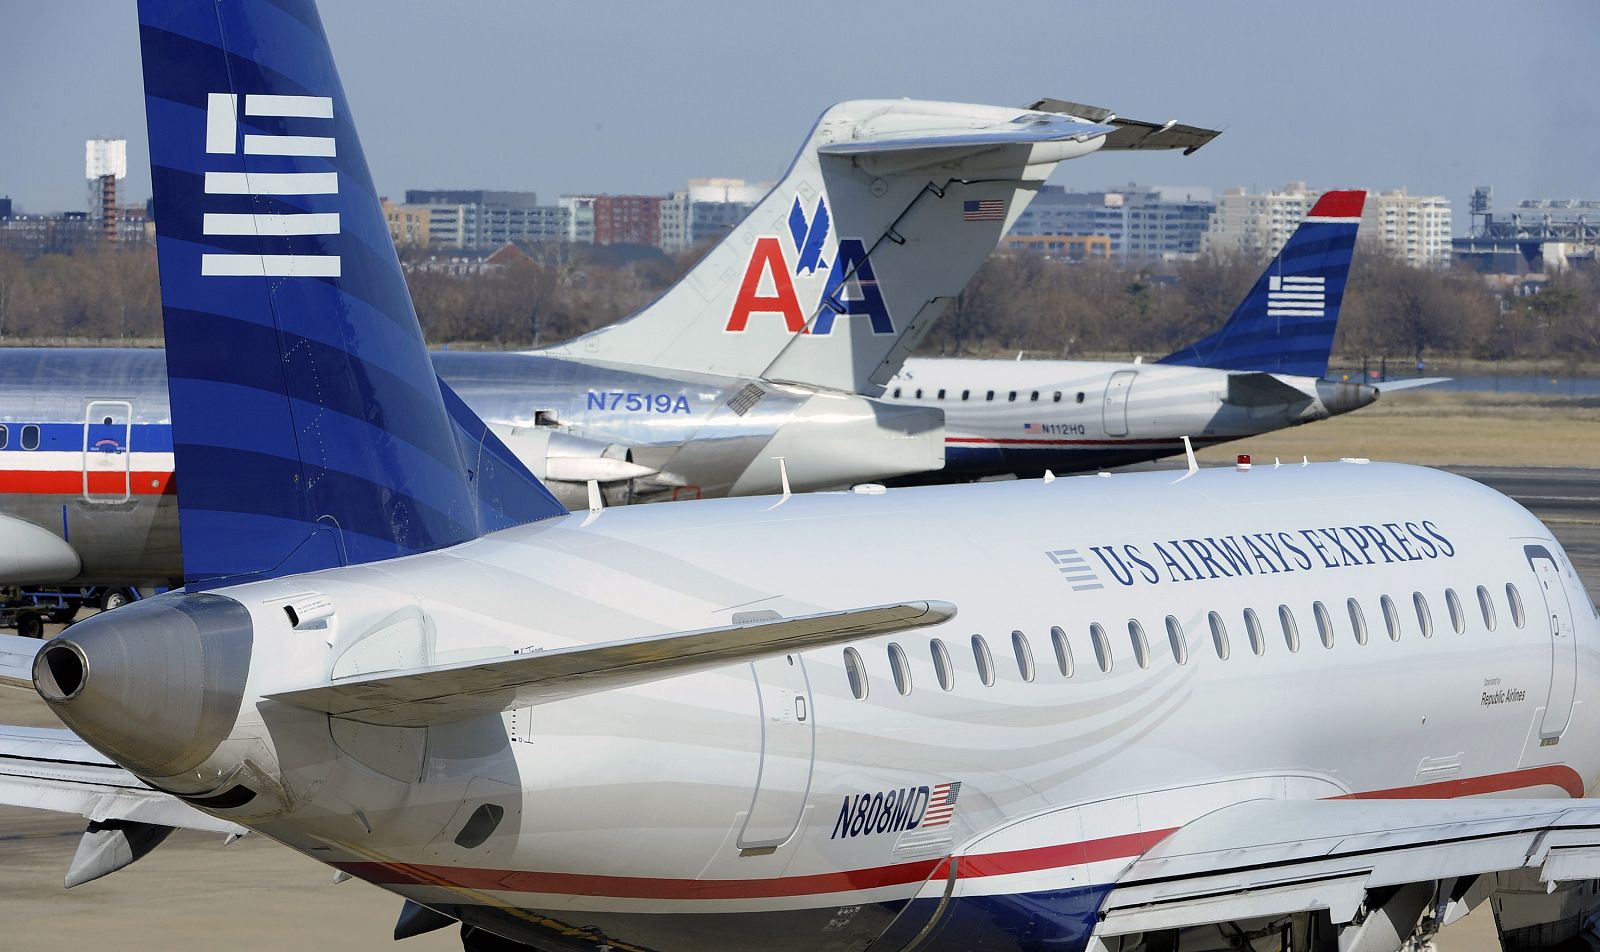 An American Airlines plane is seen between two US Airways Express planes at the Ronald Reagan Washington National Airport in Virginia